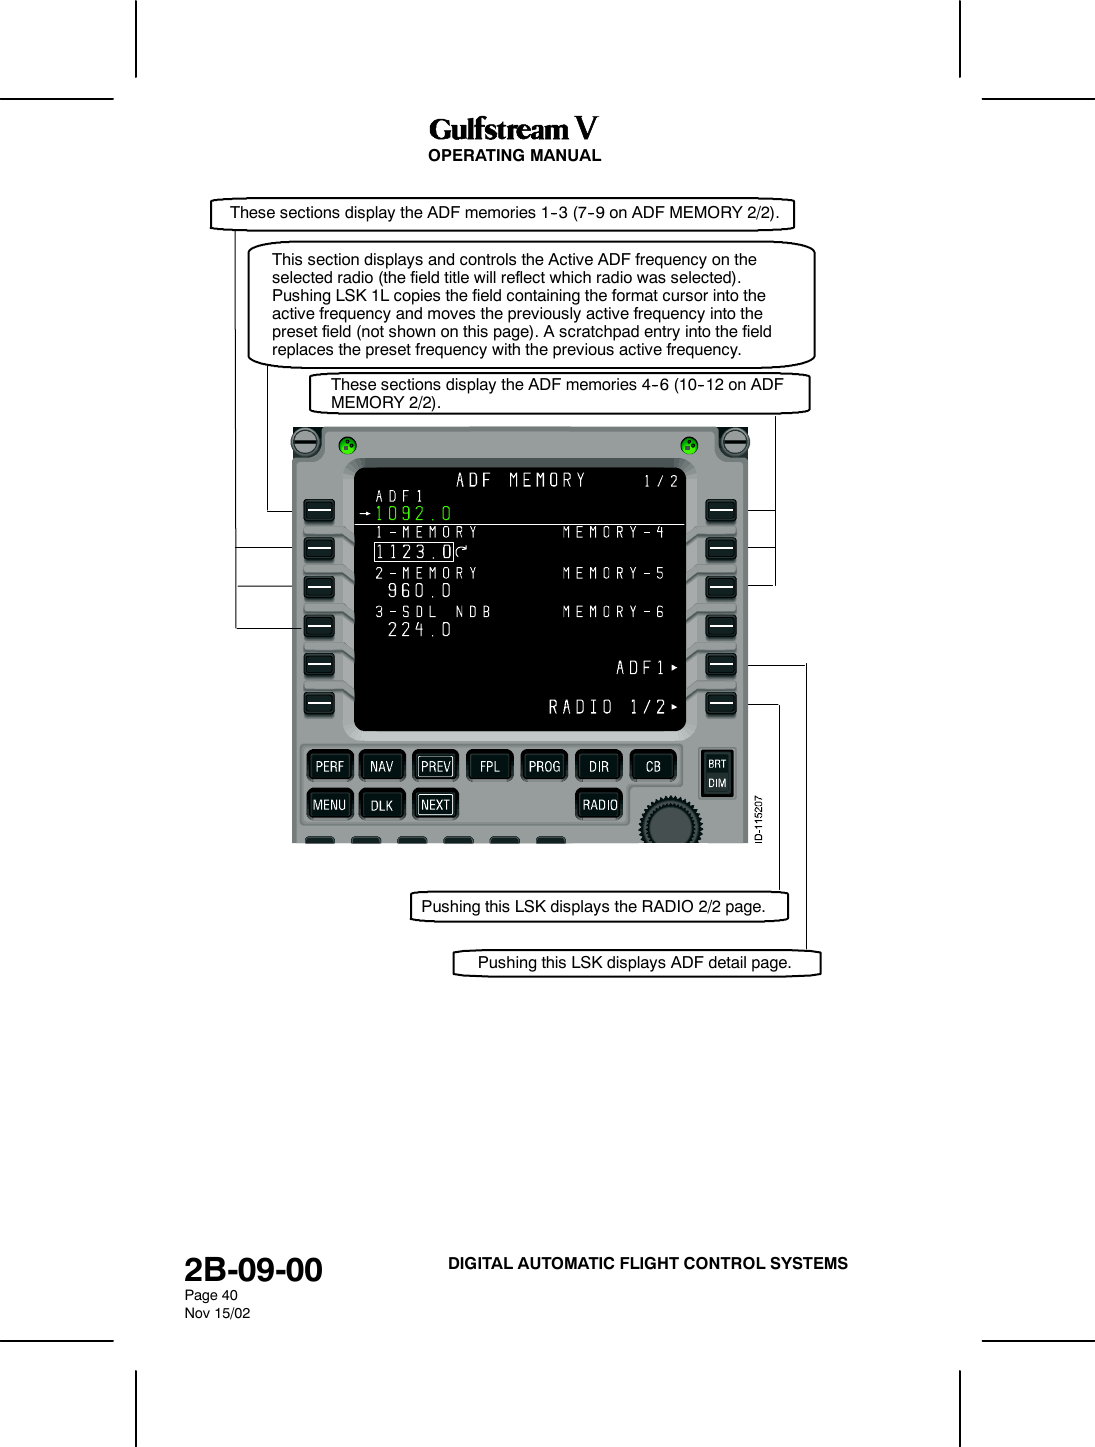 OPERATING MANUAL2B-09-00Page 40Nov 15/02DIGITAL AUTOMATIC FLIGHT CONTROL SYSTEMSThis section displays and controls the Active ADF frequency on theselected radio (the field title will reflect which radio was selected).Pushing LSK 1L copies the field containing the format cursor into theactive frequency and moves the previously active frequency into thepreset field (not shown on this page). A scratchpad entry into the fieldreplaces the preset frequency with the previous active frequency.These sections display the ADF memories 1--3 (7--9 on ADF MEMORY 2/2).These sections display the ADF memories 4--6 (10--12 on ADFMEMORY 2/2).Pushing this LSK displays ADF detail page.Pushing this LSK displays the RADIO 2/2 page.